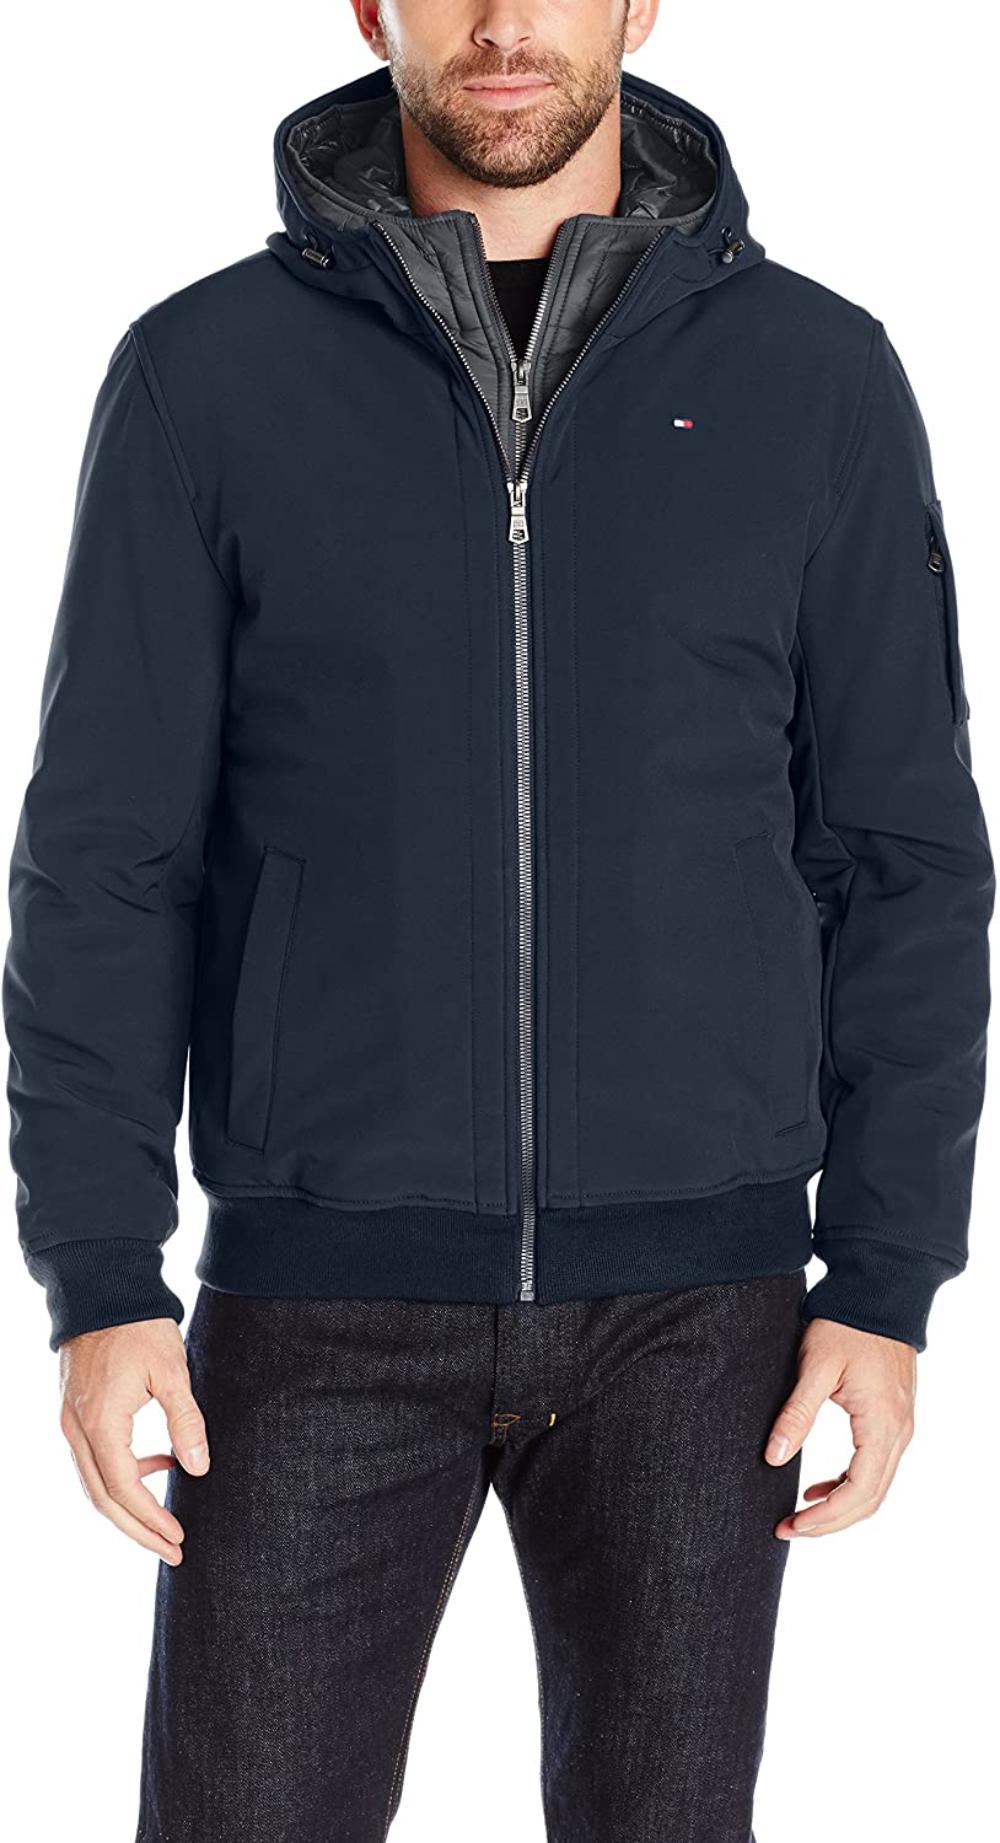 Tommy Hilfiger Mens Soft Shell Fashion Bomber with Contrast Bib and Hood